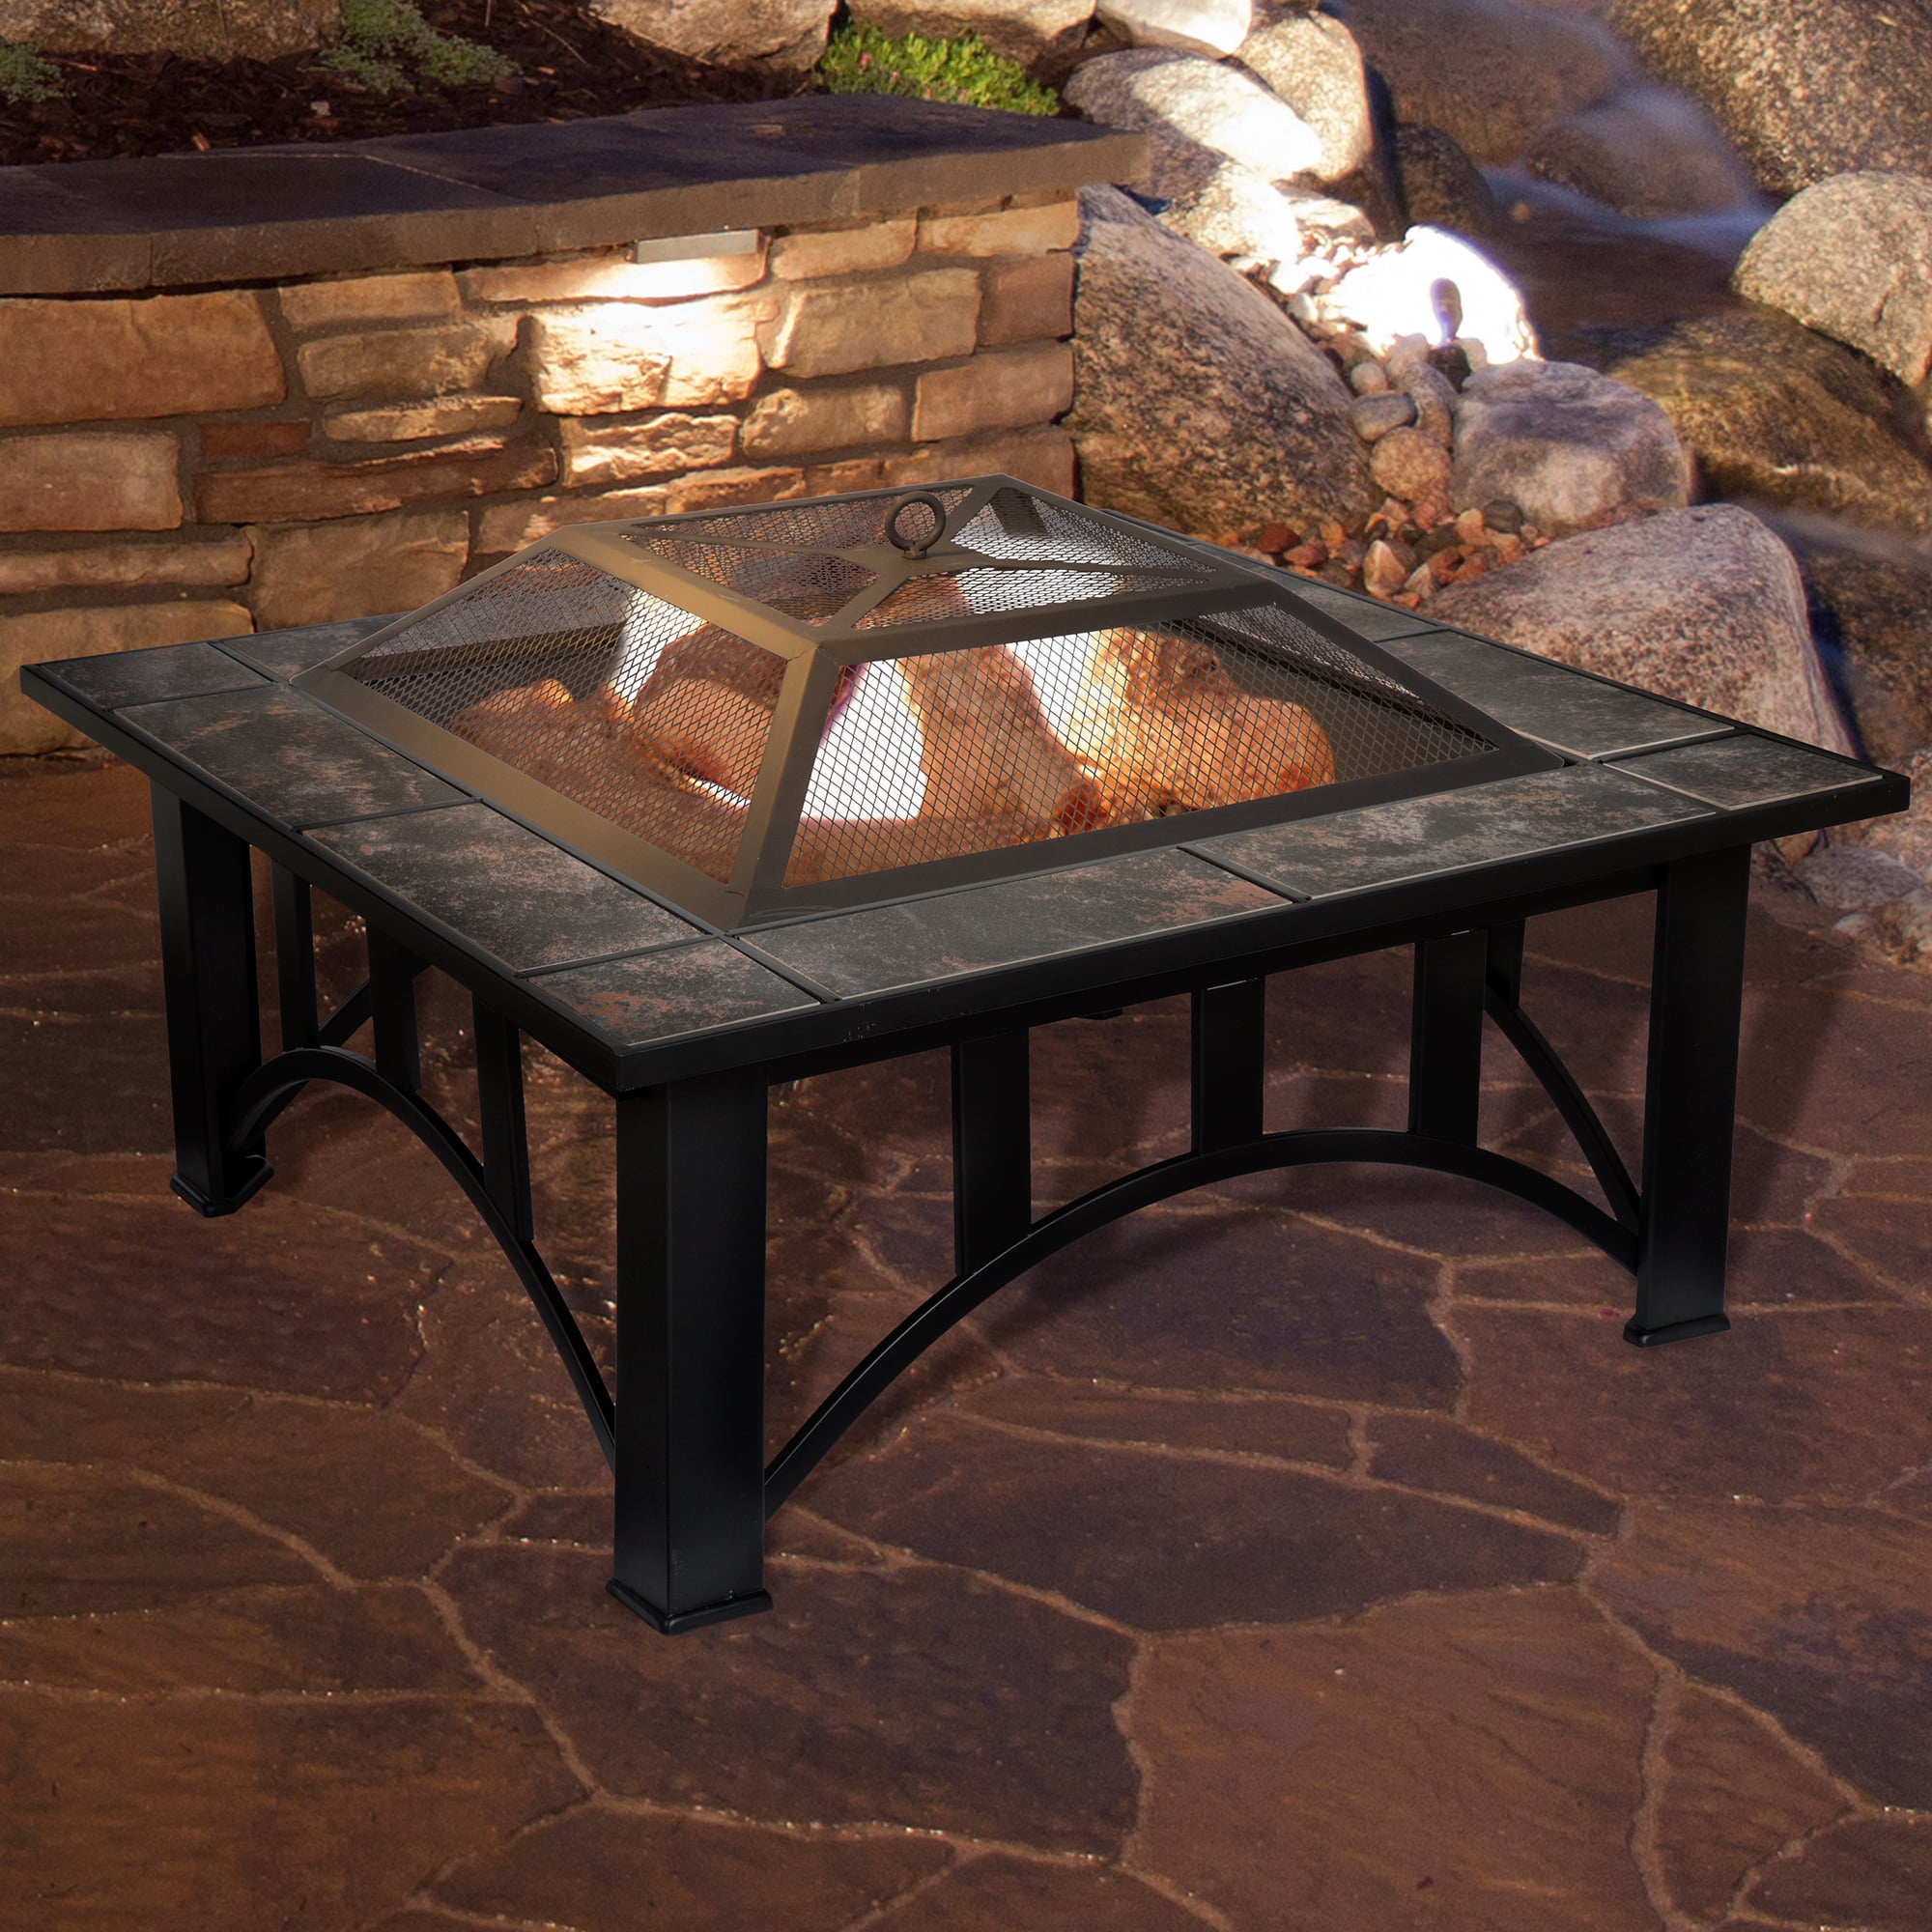 Outdoor 37" Metal Firepit Backyard Patio Garden Stove Fire Pit With Cover Q8R4 